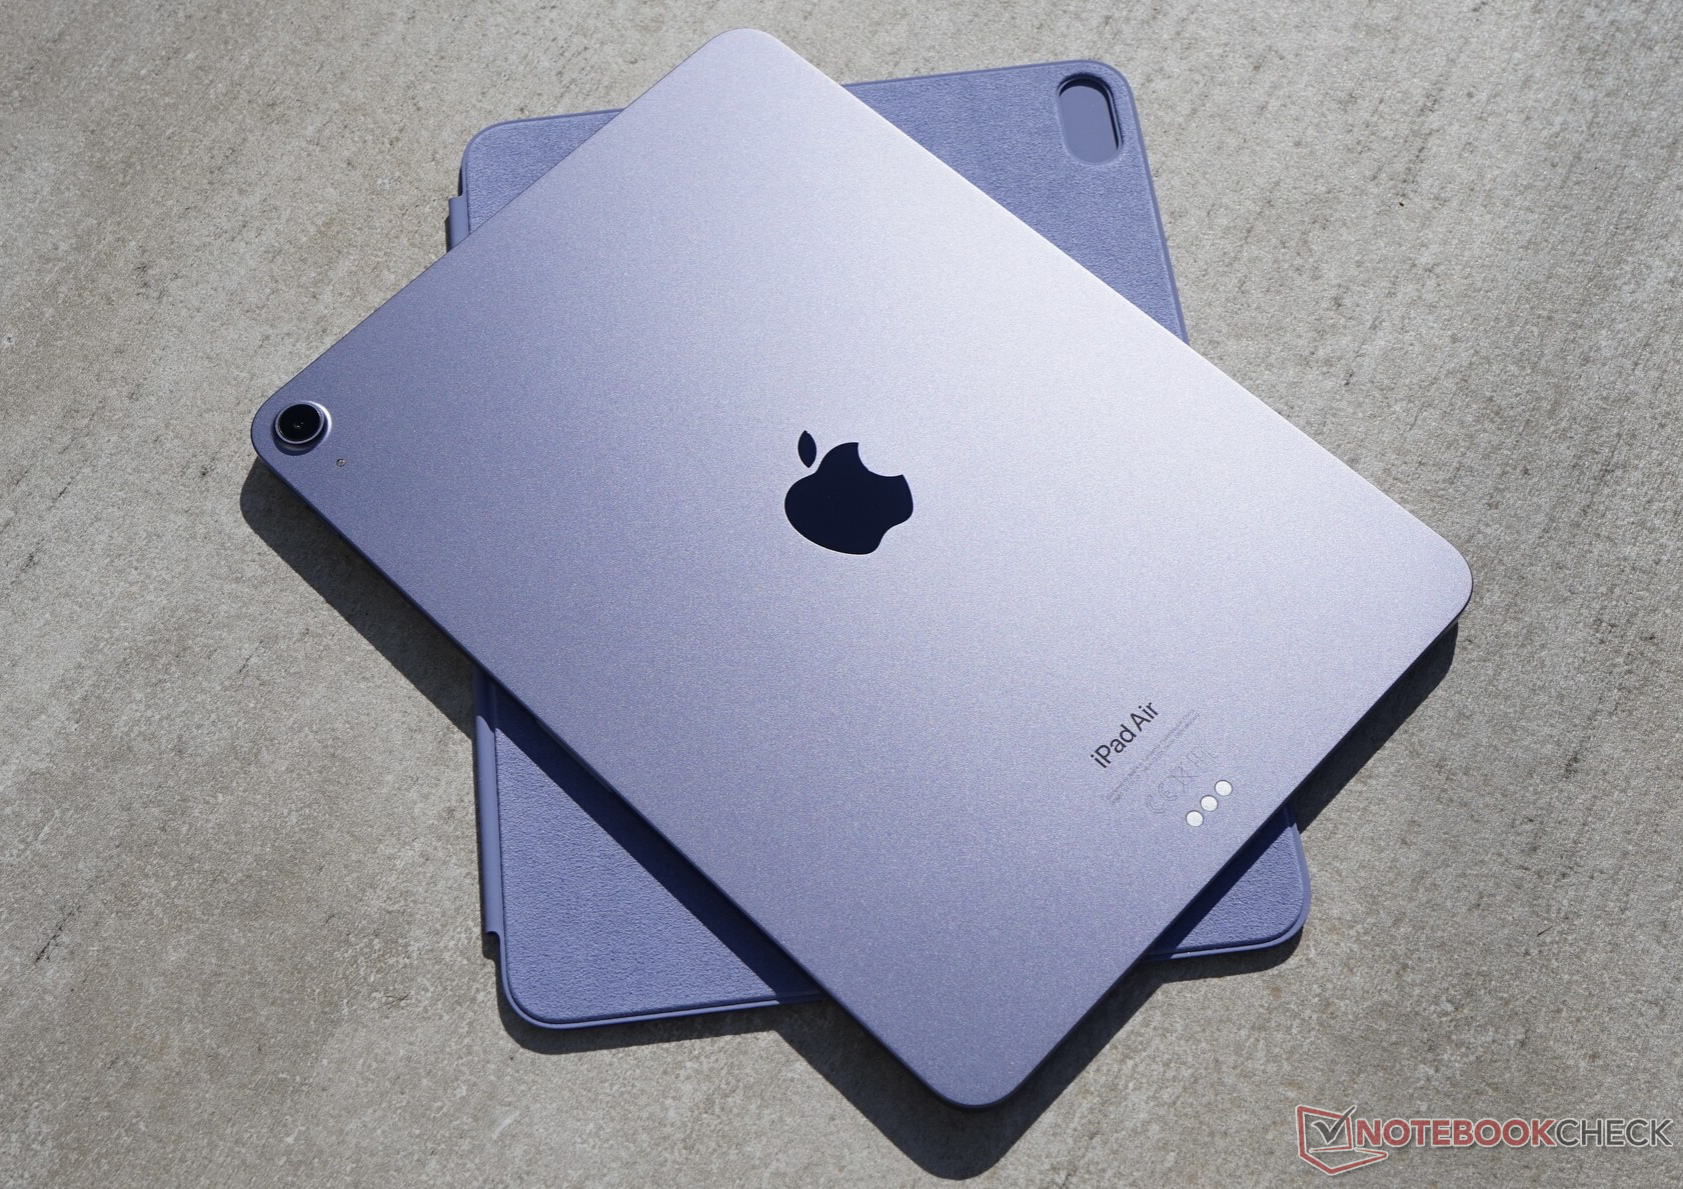 New larger Apple iPad Air tipped to launch as cheaper alternative to ...